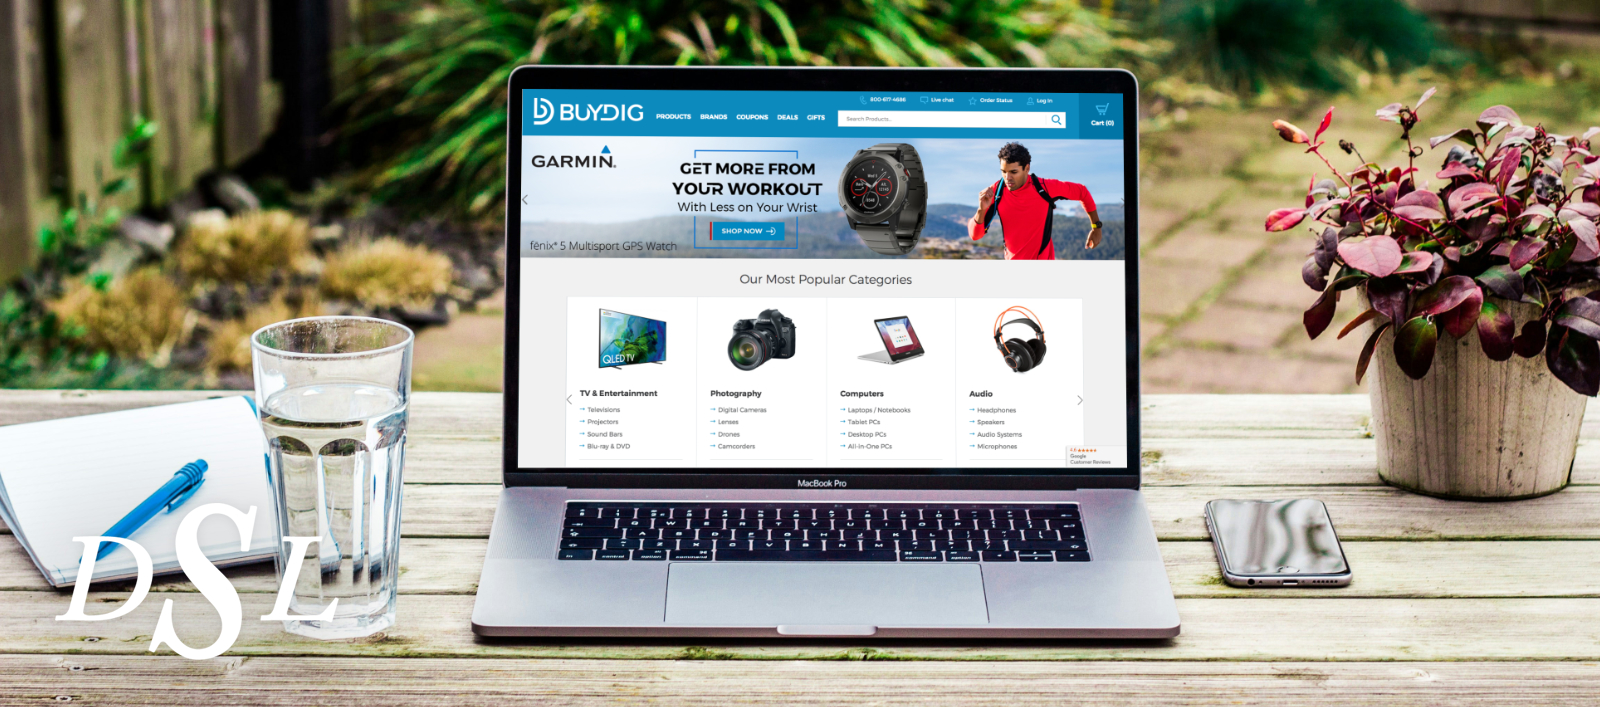 A laptop displaying the Buydig.com home page and Garmin Fenix 5 GPS watch banner.